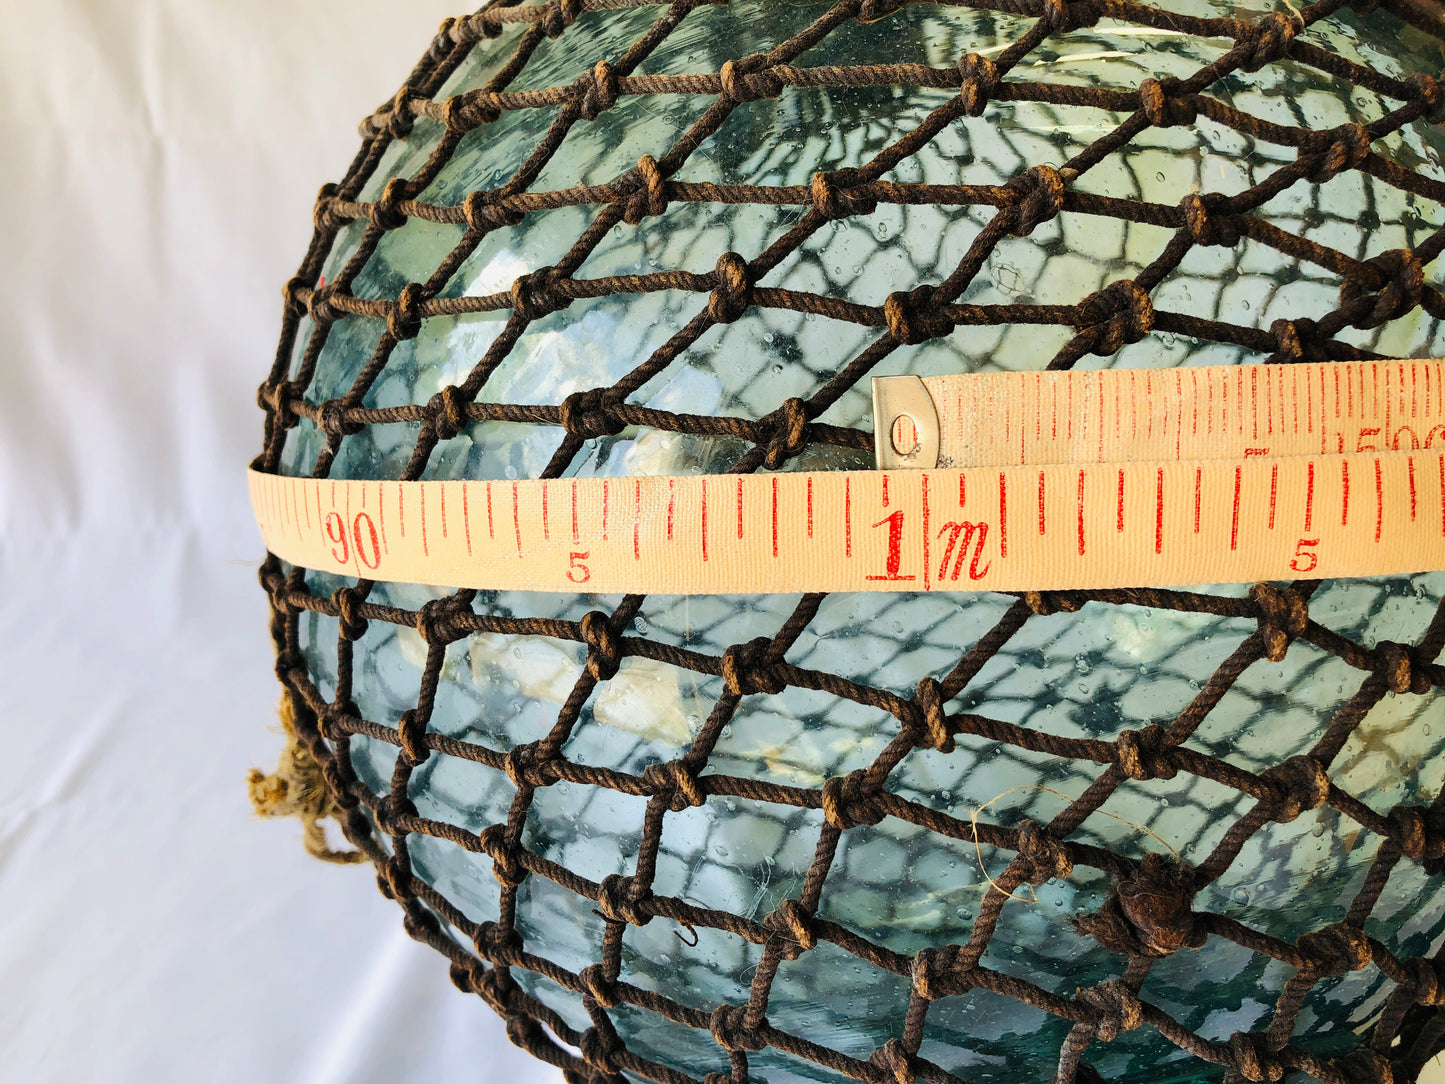 Y4406 FLOAT Glass Floating Ball fishing bouy net Japanese antique vintage Japan